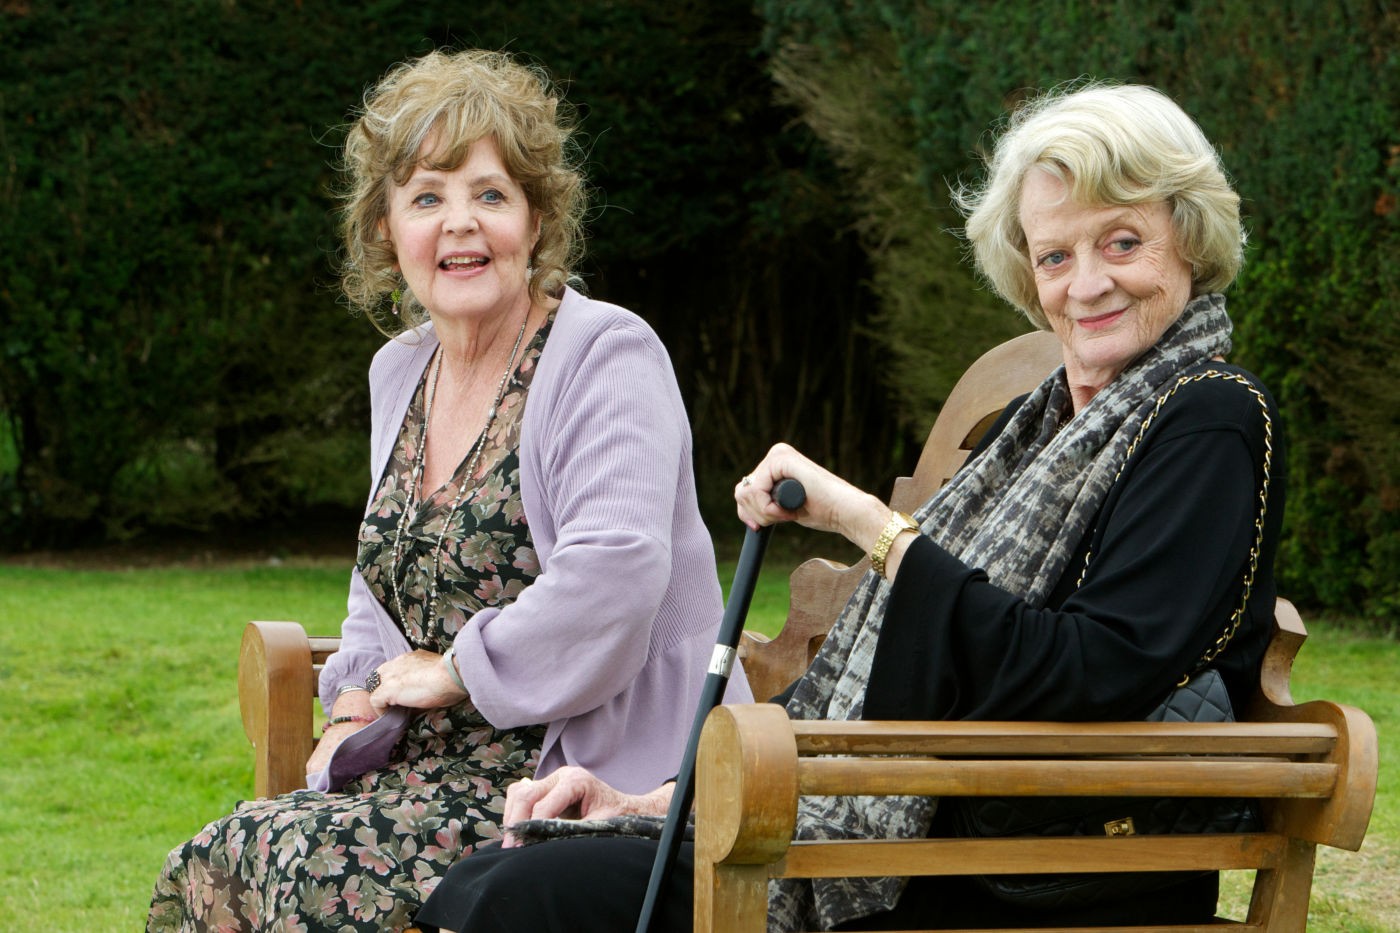 Pauline Collins stars as Cissy Robson and Maggie Smith stars as Jean Horton in The Weinstein Company's Quartet (2013)